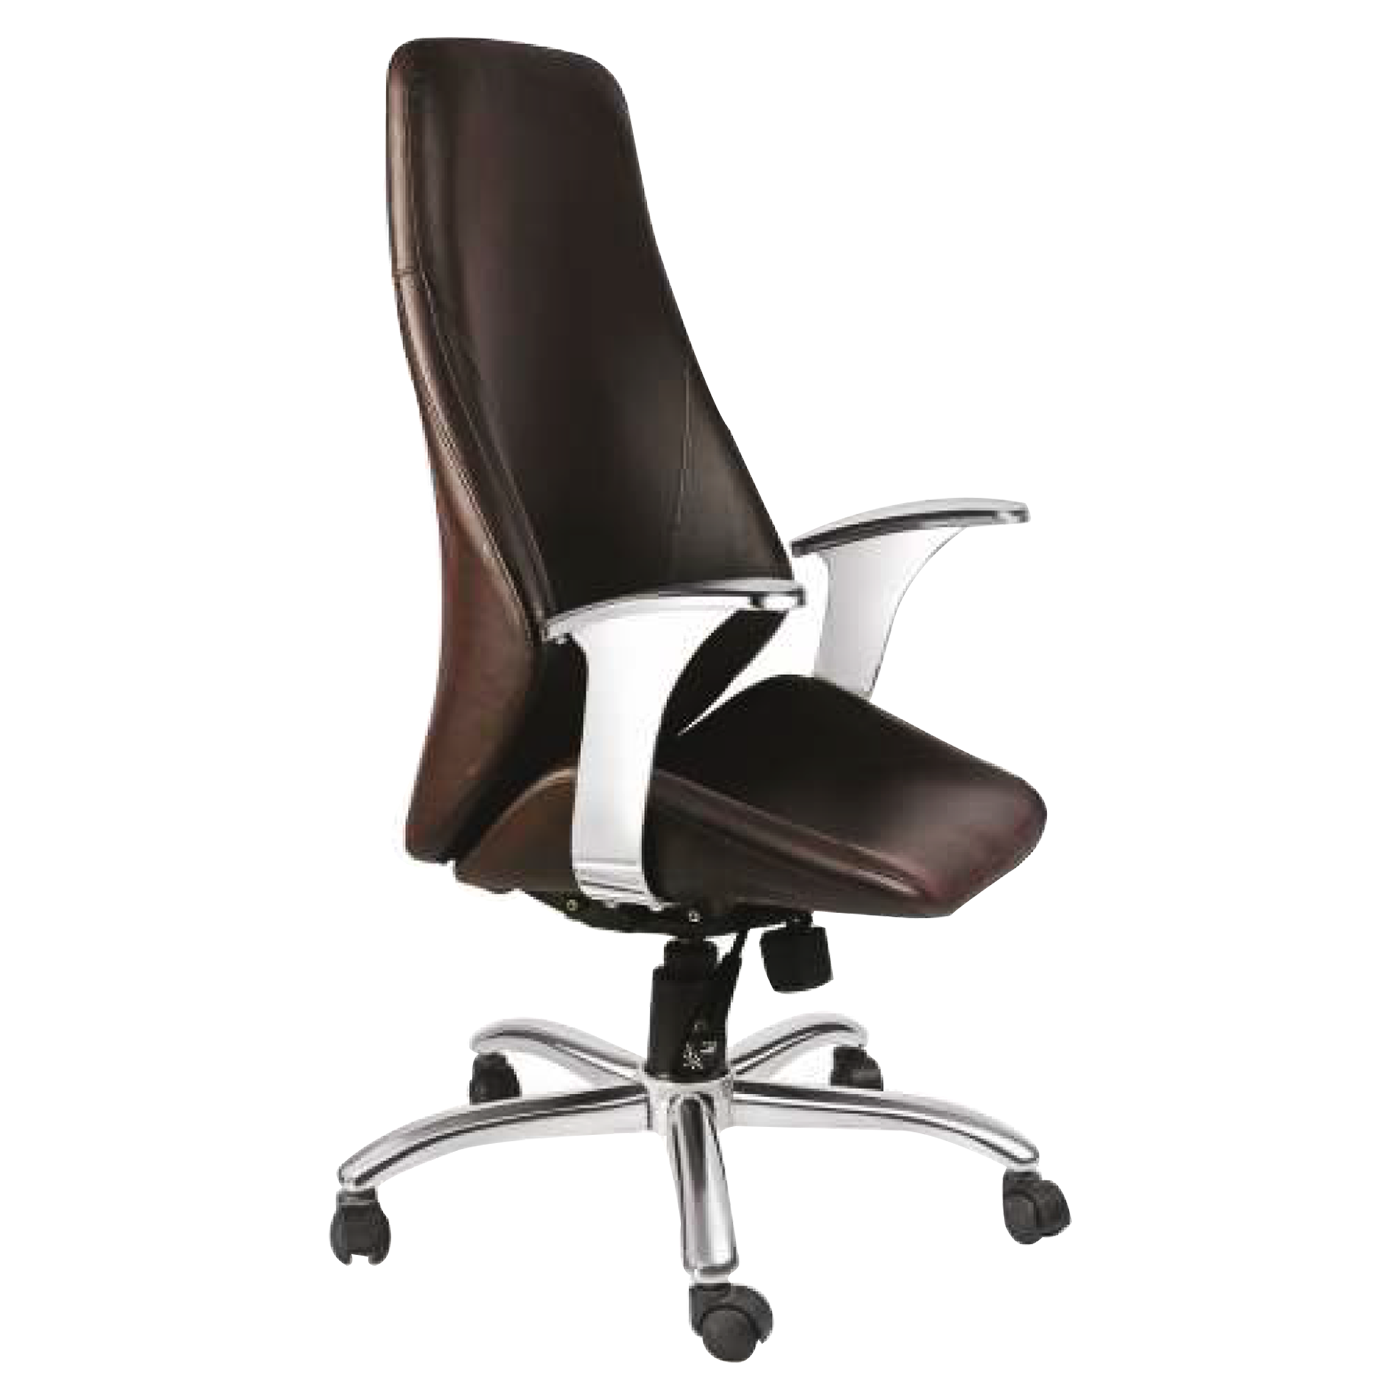 Detec™ Executive High Back Chair with ss arms sincro any locking mechanism hydraulic crome base in dark brown color